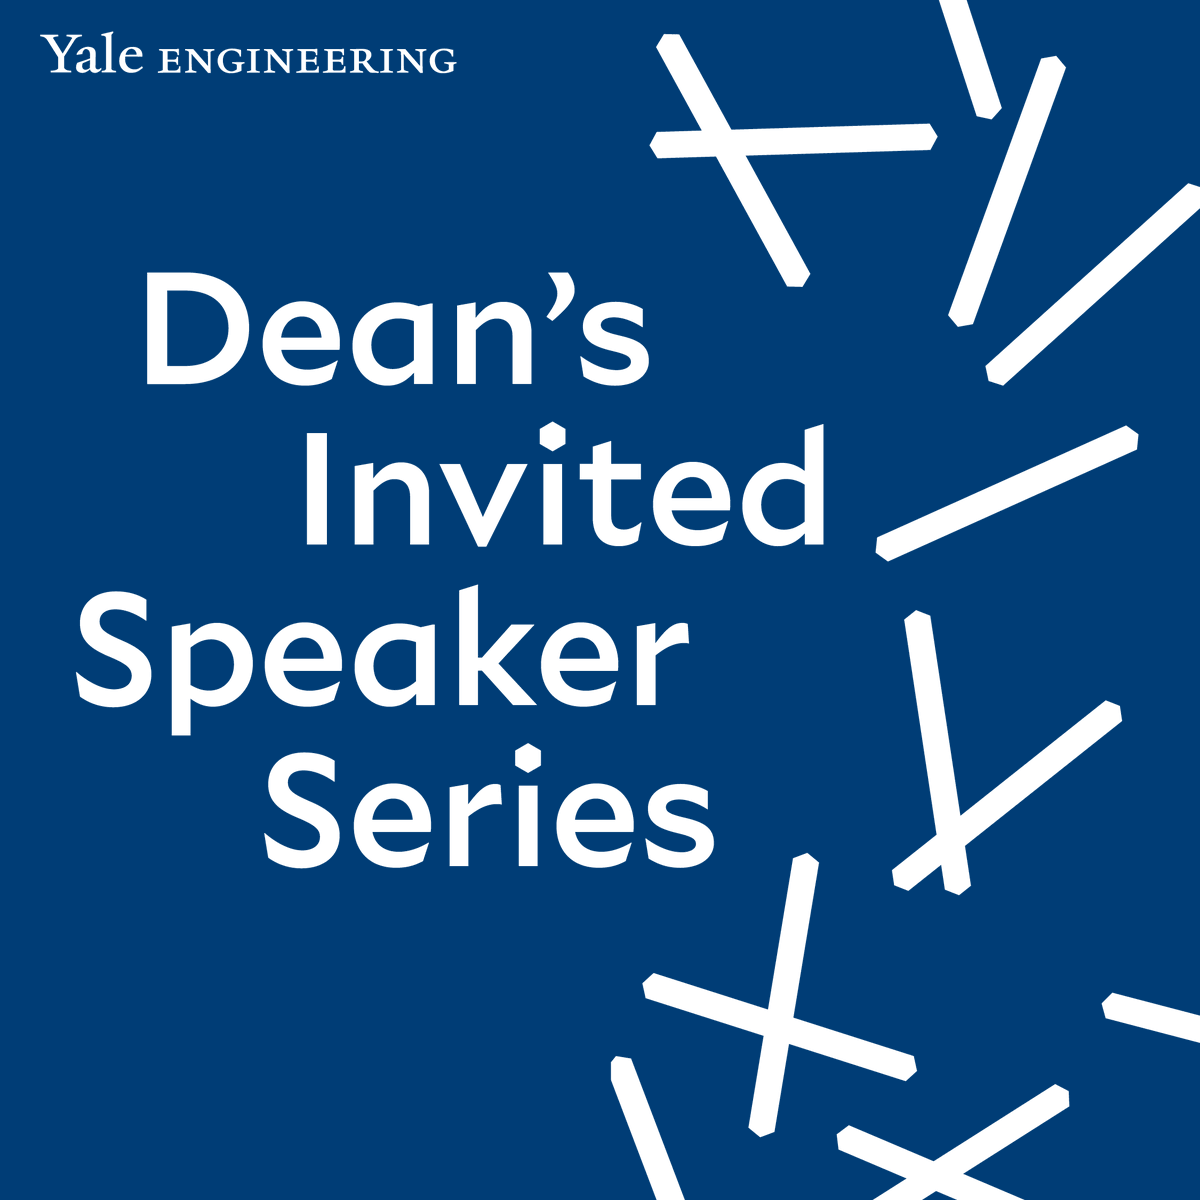 Yale Engineering's Dean’s Invited Speaker Series brings leaders from @IBM, @TWSemicon, @Amazon, @Google, @Wikimedia Foundation & @Meta, discussing leadership, tech & innovation. Watch individual talks or the series on our YouTube Channel! Subscribe now!: loom.ly/yQJBwA8